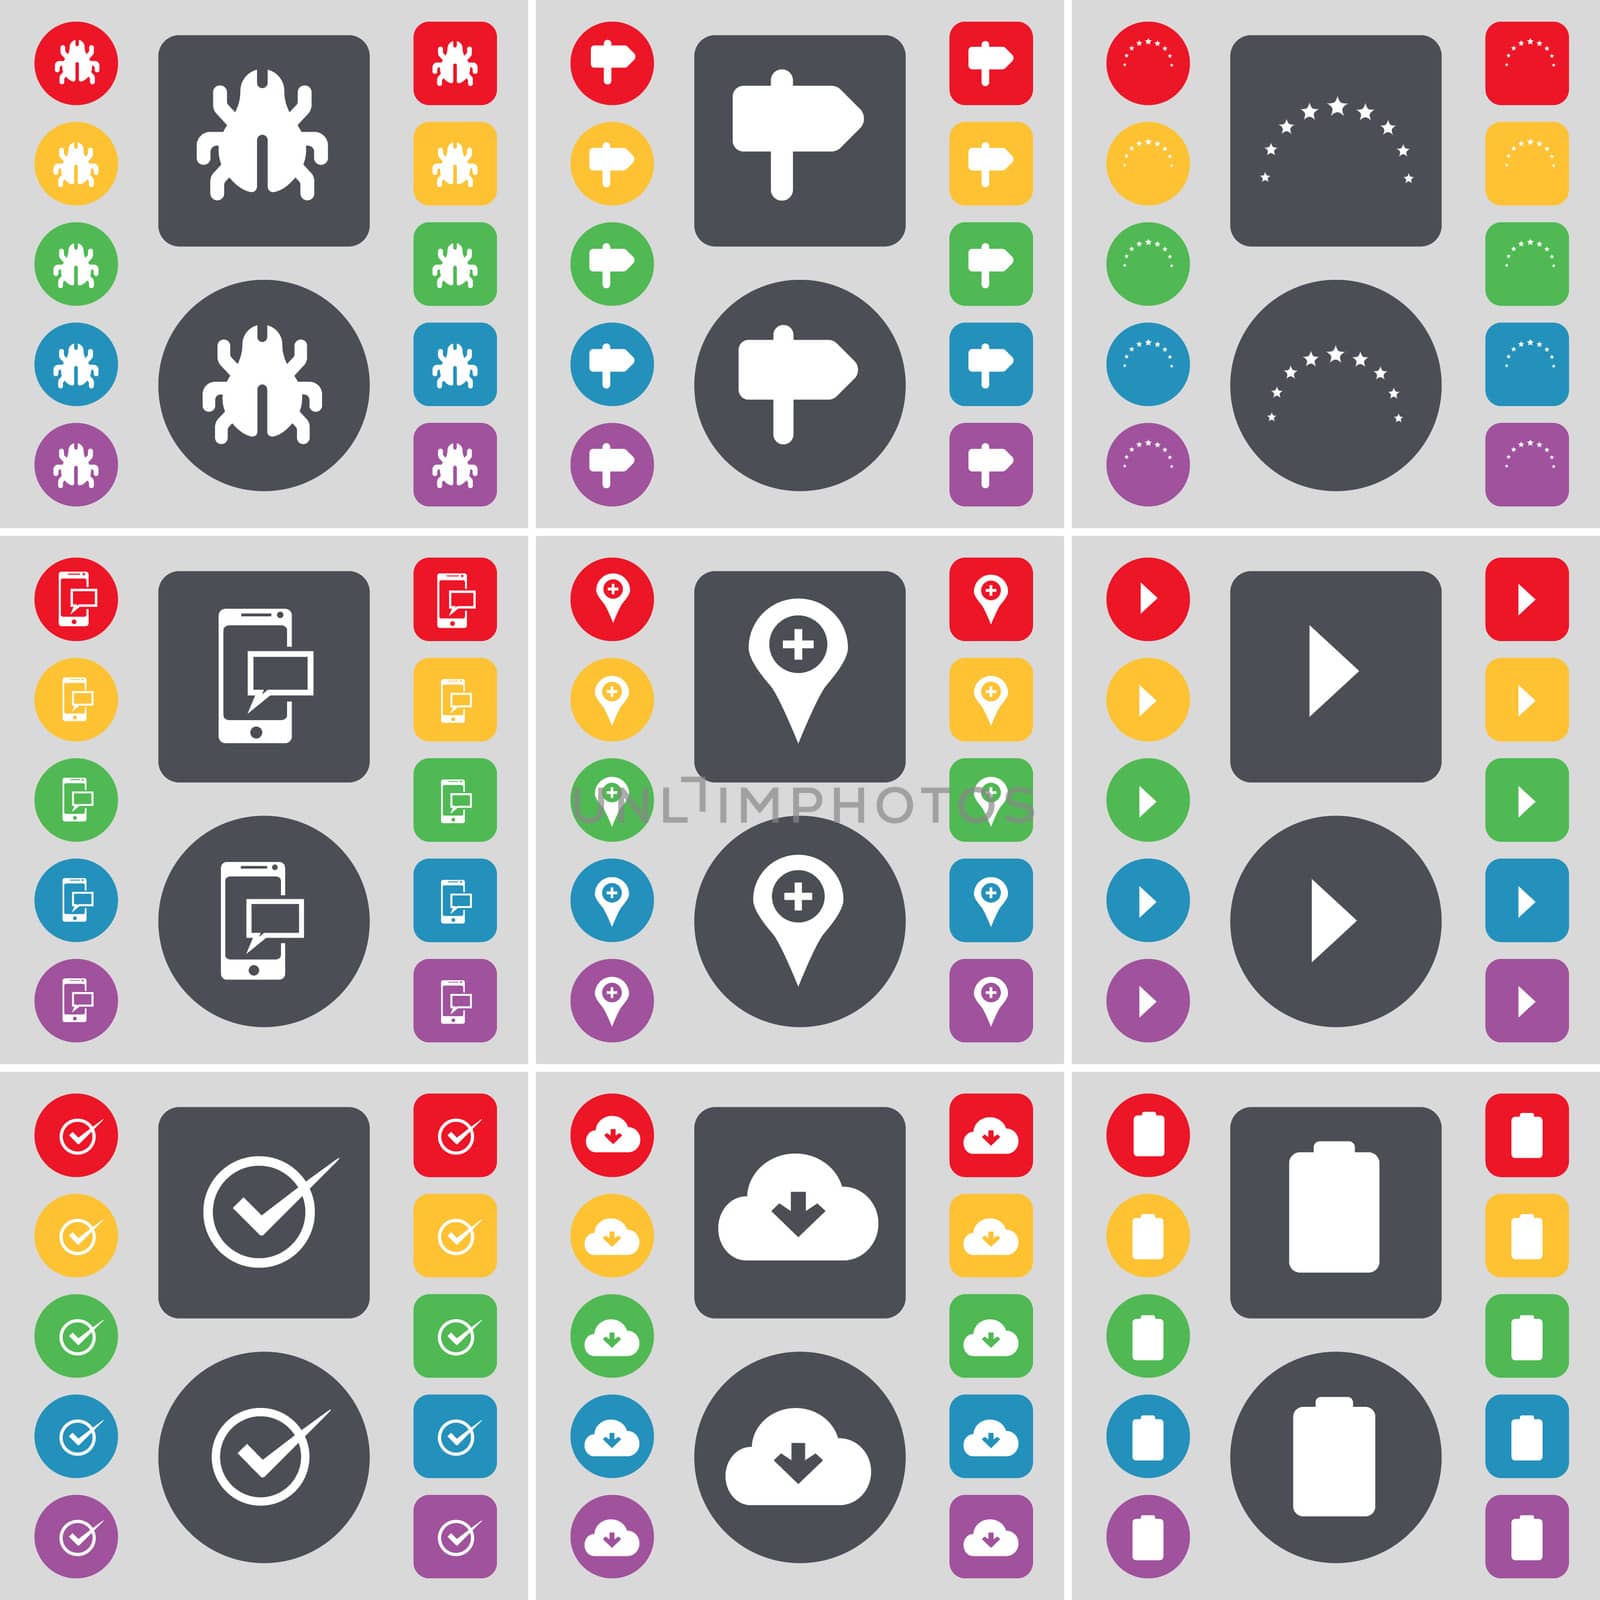 Bug, Signpost, Stars, SMS, Checkpoint, Media play, Tick, Cloud, Battery icon symbol. A large set of flat, colored buttons for your design.  by serhii_lohvyniuk